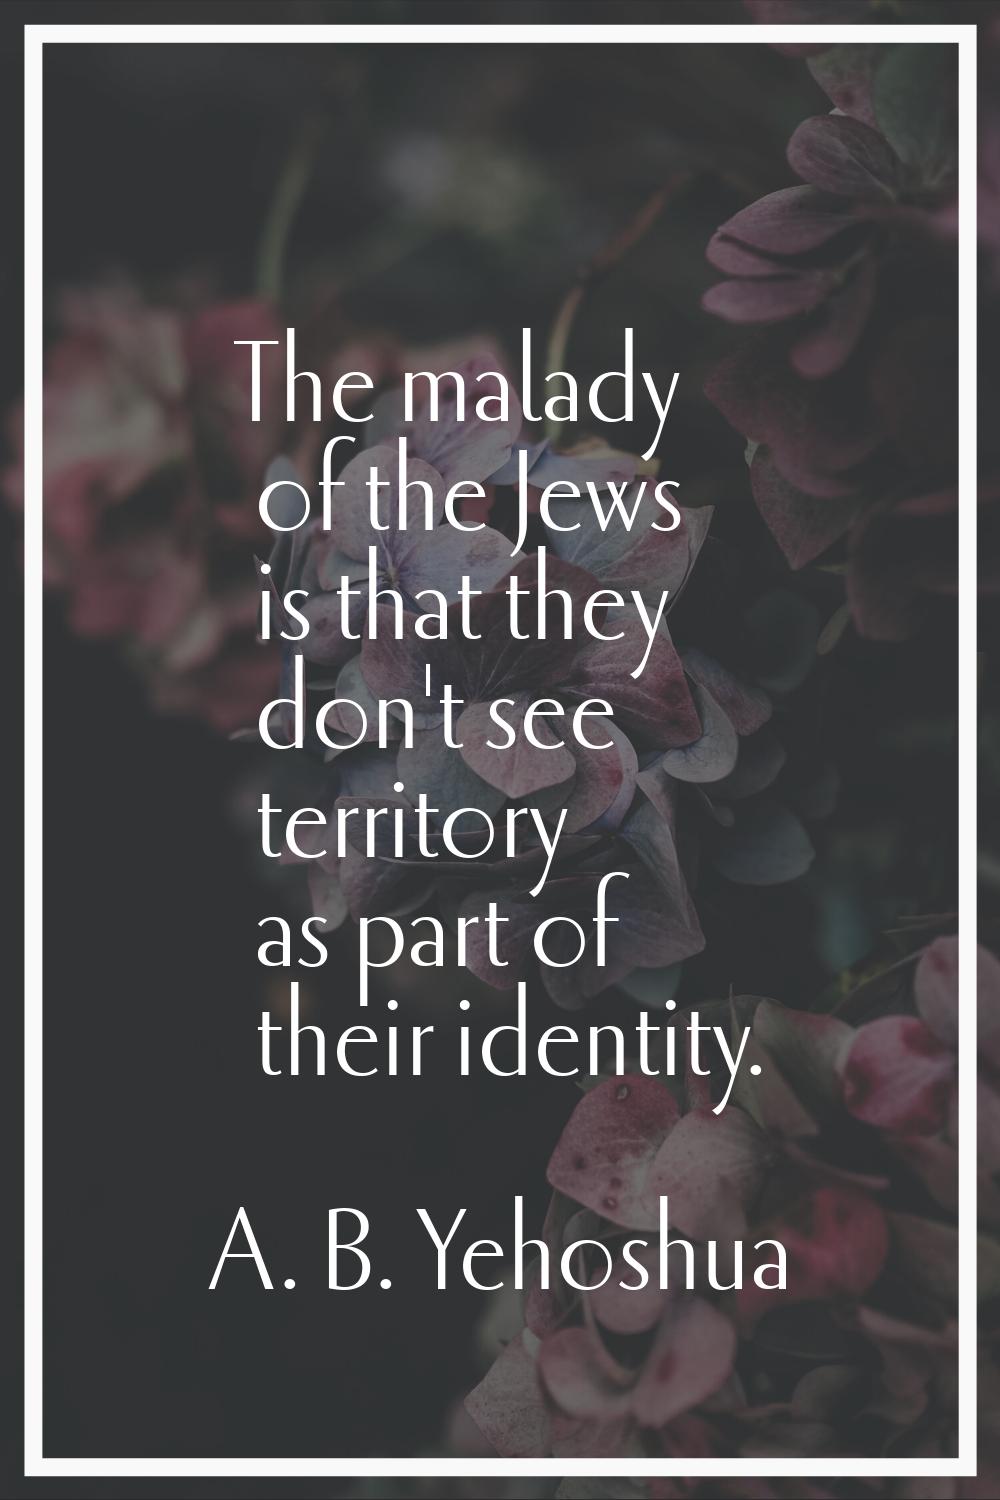 The malady of the Jews is that they don't see territory as part of their identity.